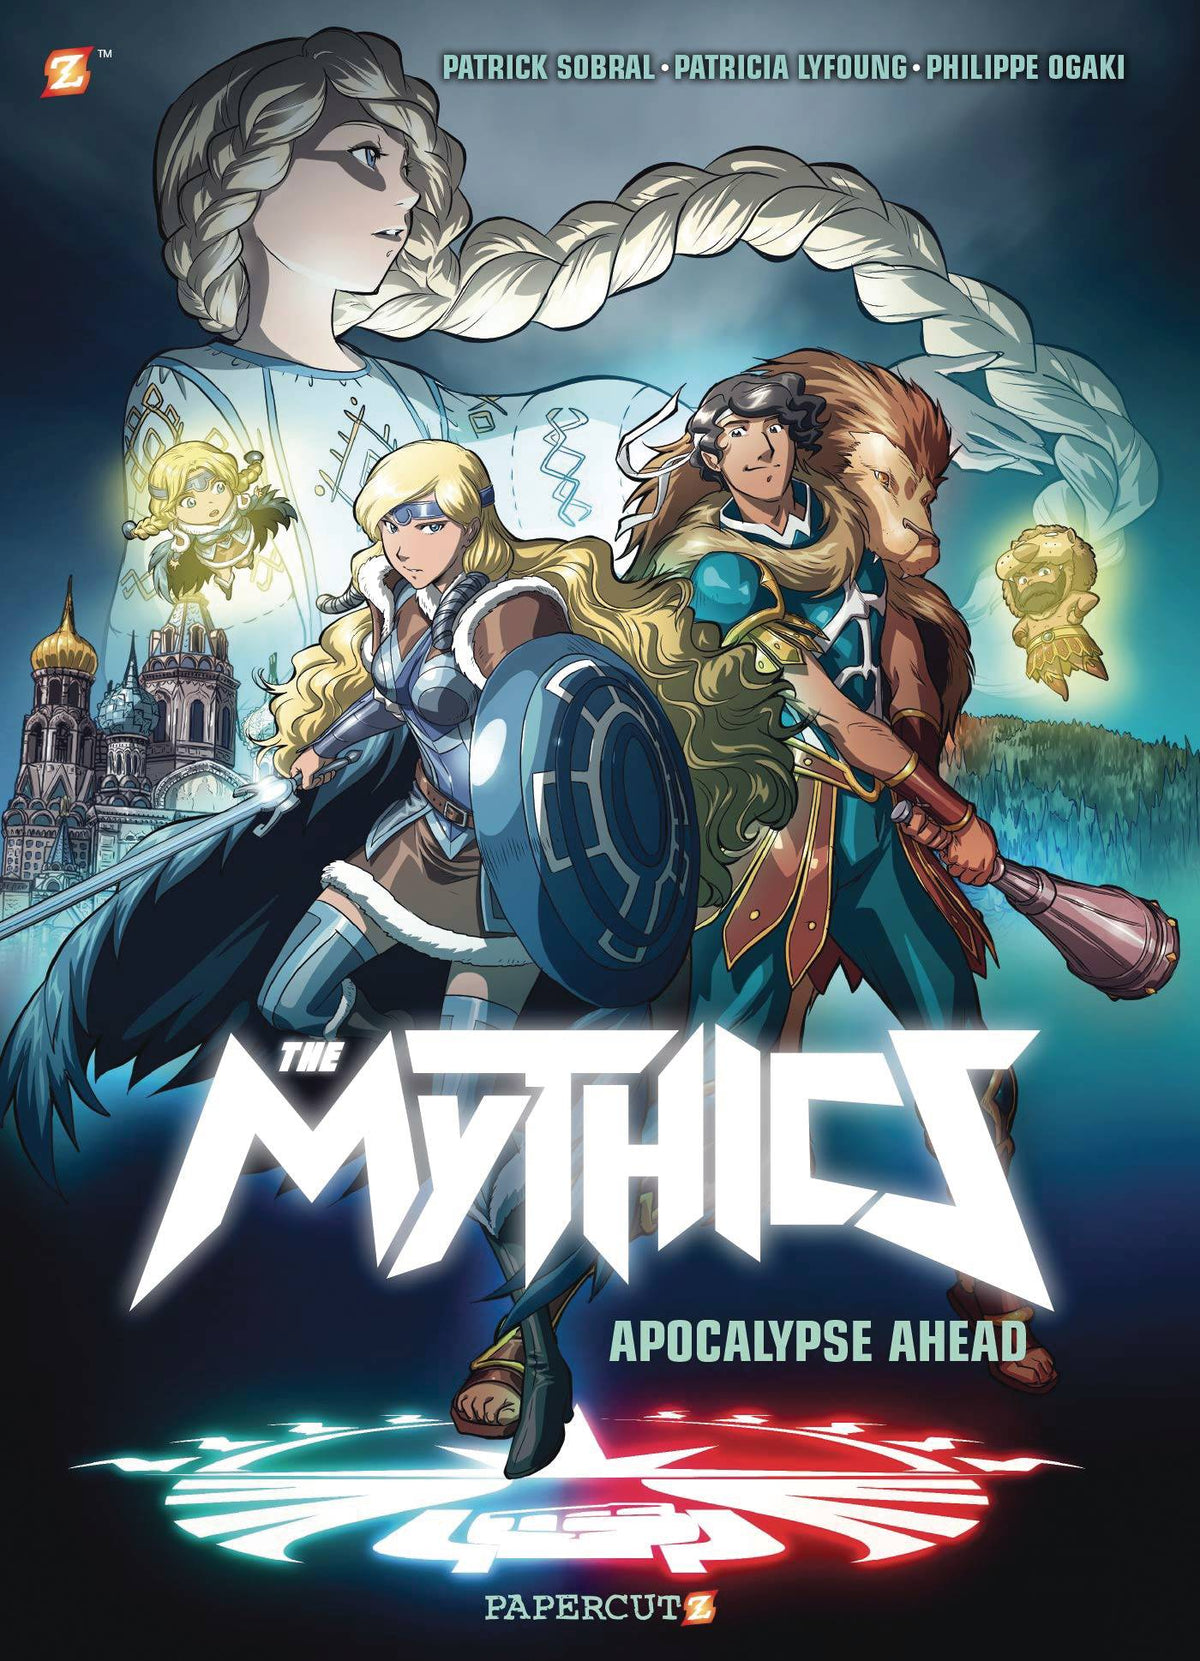 Mythics Gn Vol 03 Apocalypse Ahead - State of Comics